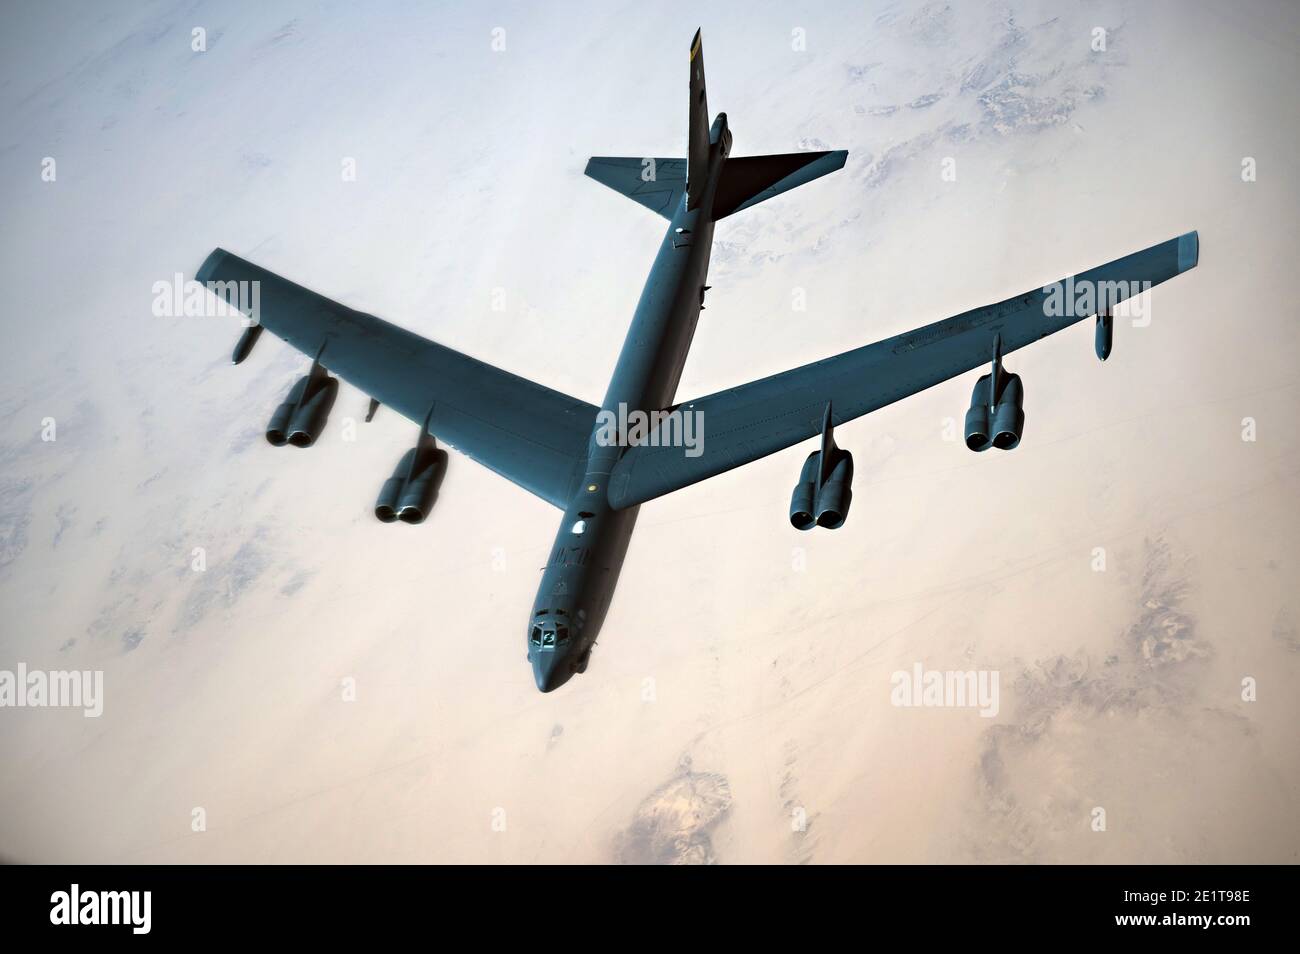 Saudi Arabia, Saudi Arabia. 07th Jan, 2021. A U.S. Air Force B-52 Stratofortress strategic bomber flies over Saudi airspace January 7, 2021 in Saudi Arabia. The bomber and escort is a show of force mission as a message to Iran. Credit: Planetpix/Alamy Live News Stock Photo